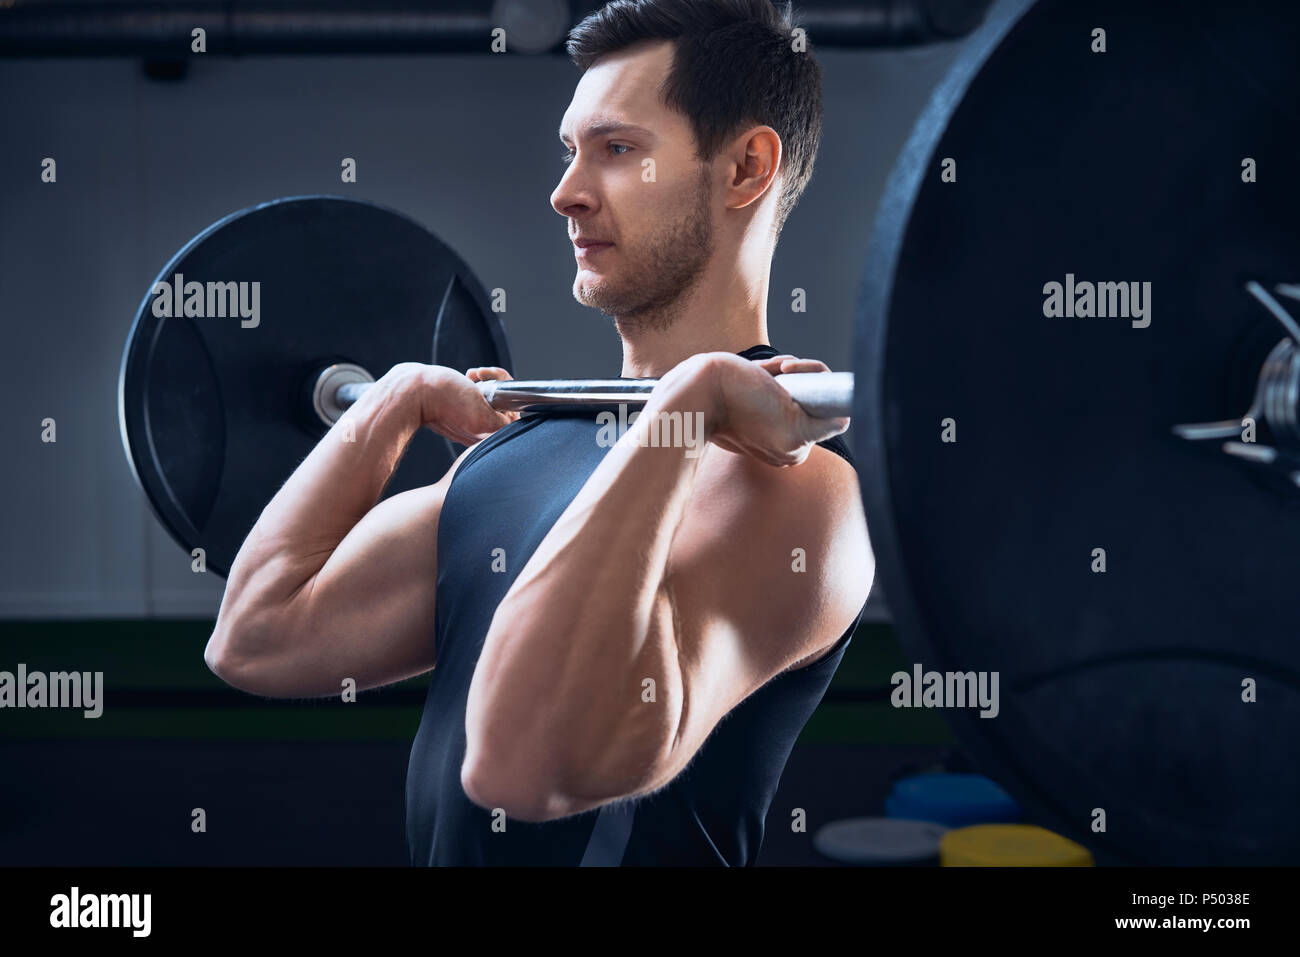 Man doing push press barbell exercise at gym Stock Photo